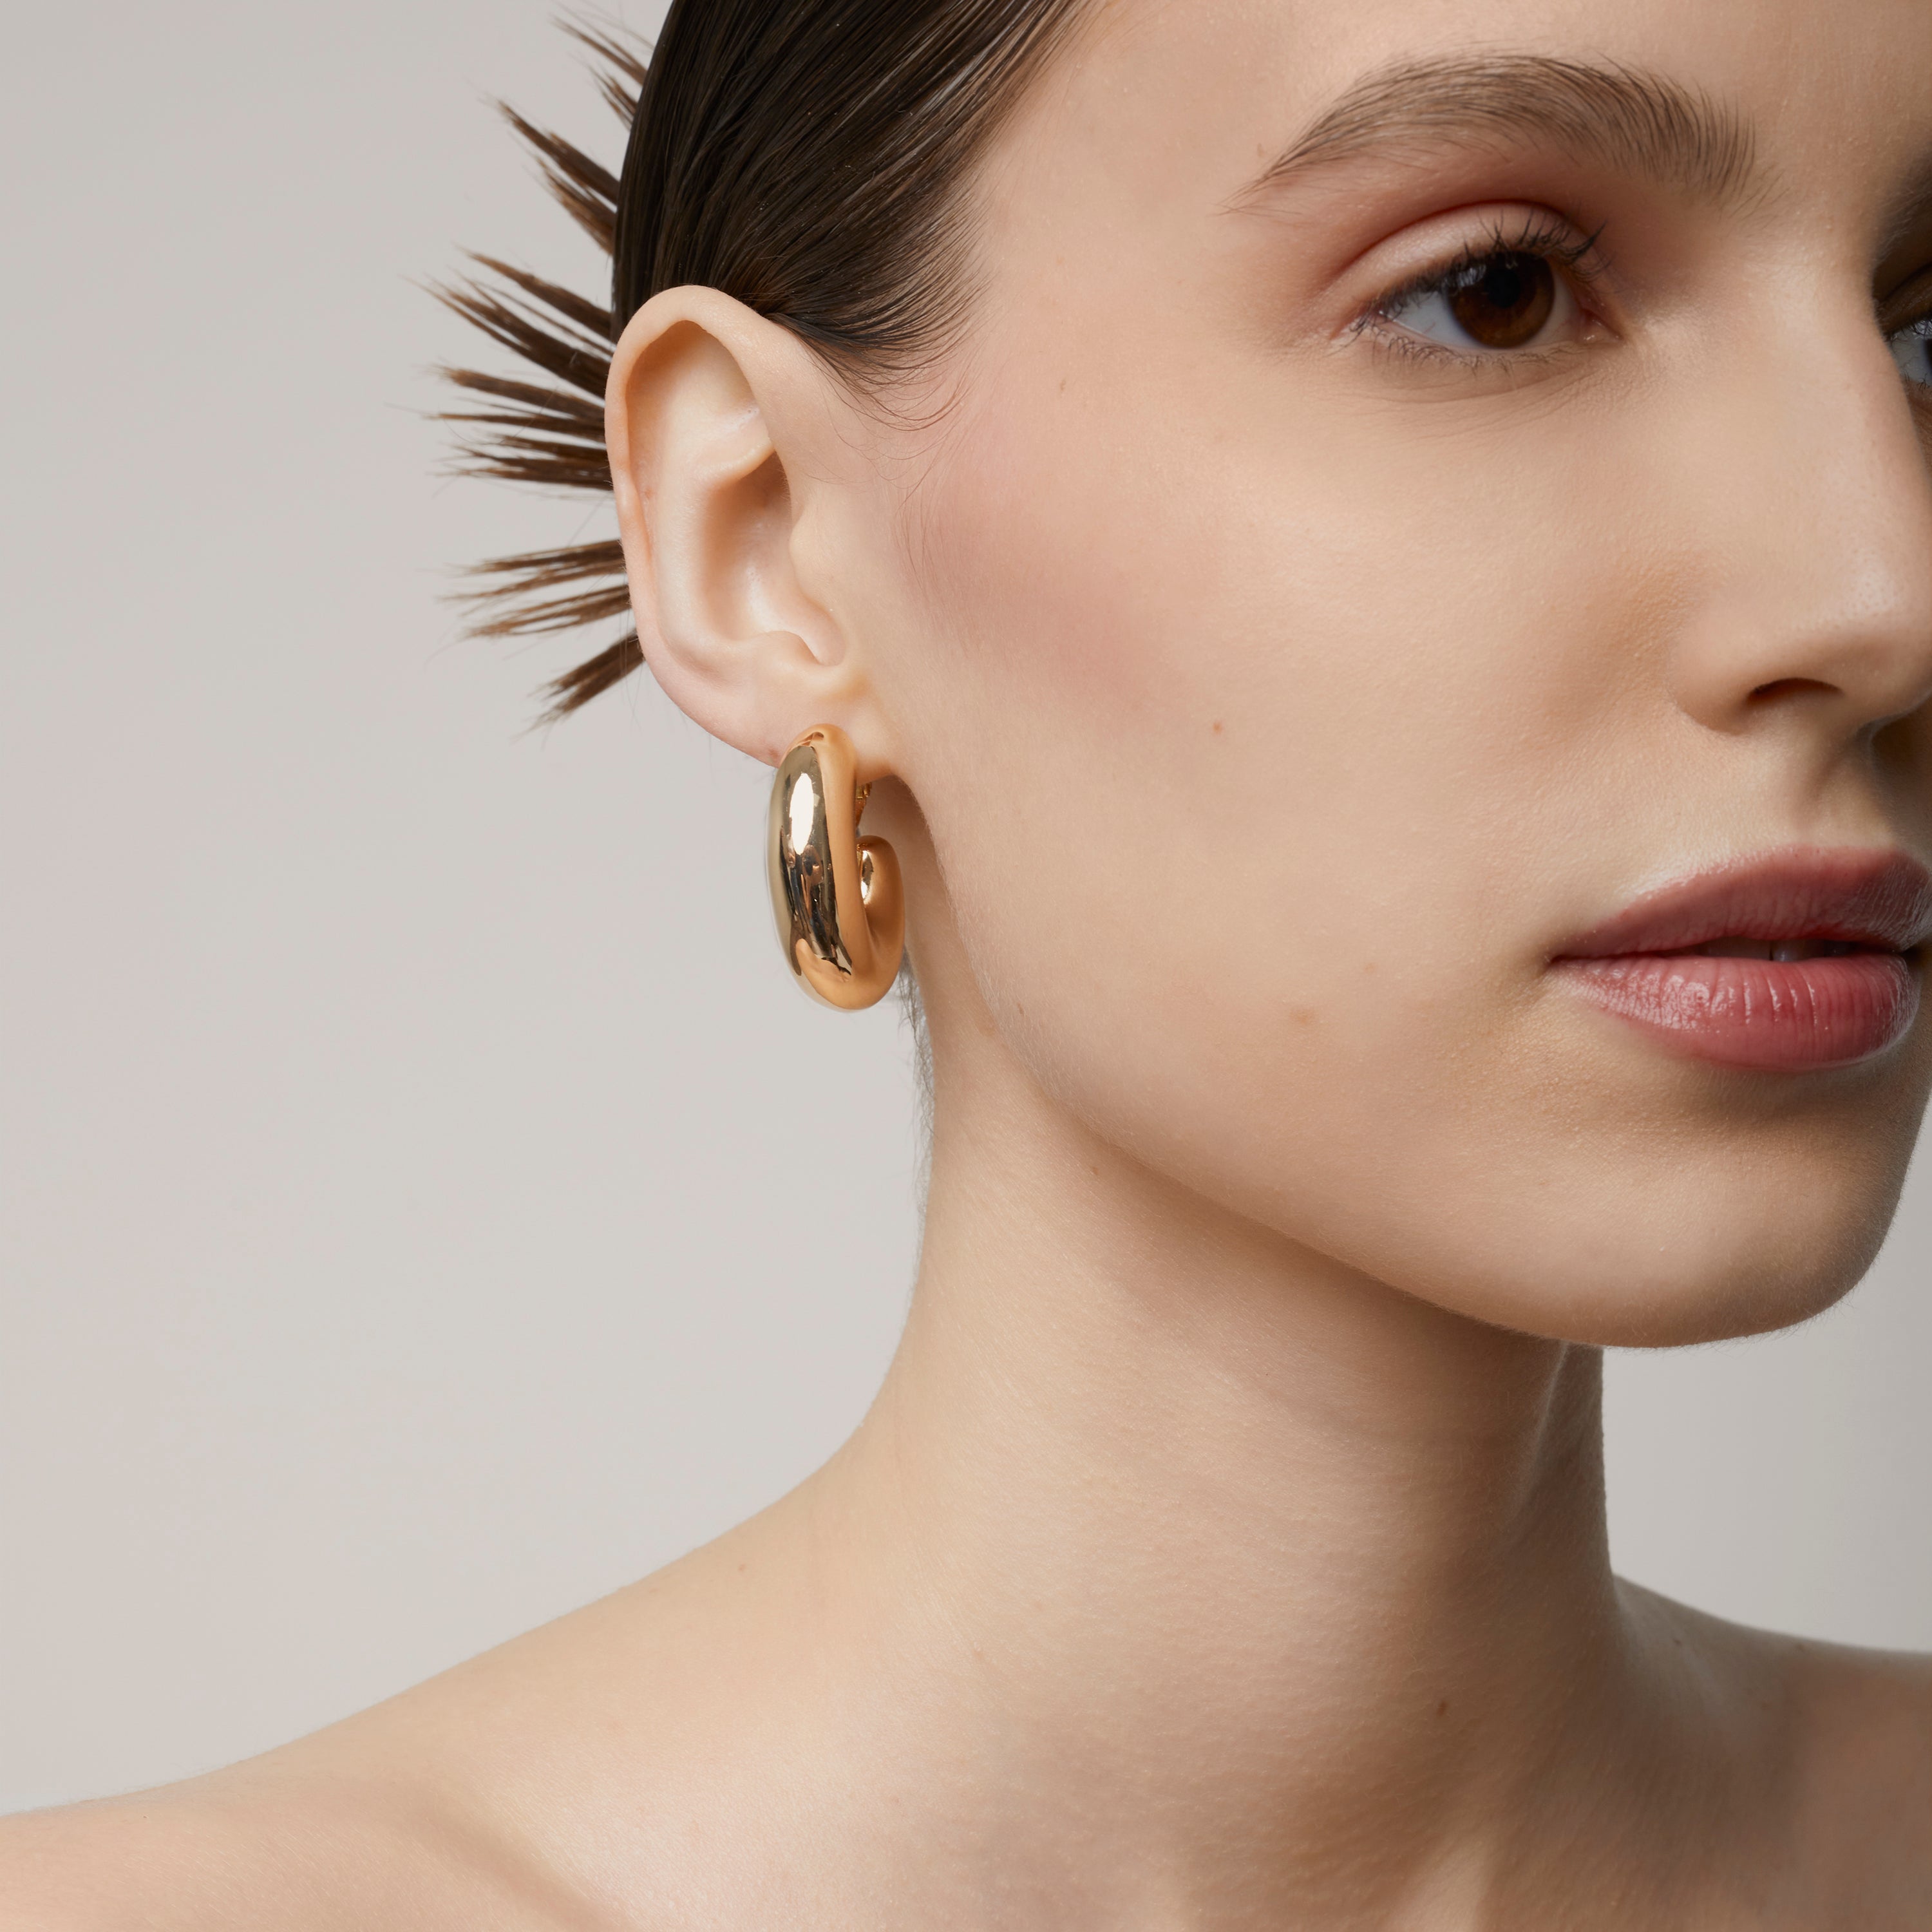 A model wearing the Chunky Oval Hoop Clip On Earrings in Gold - the perfect solution for those with thick, large, sensitive, small, thin, or keloid prone ears. With a convenient screwback clip-on closure, these earrings can be manually adjusted for a secure and comfortable fit that lasts up to 12 hours. This single pair is the perfect addition to any jewelry collection.